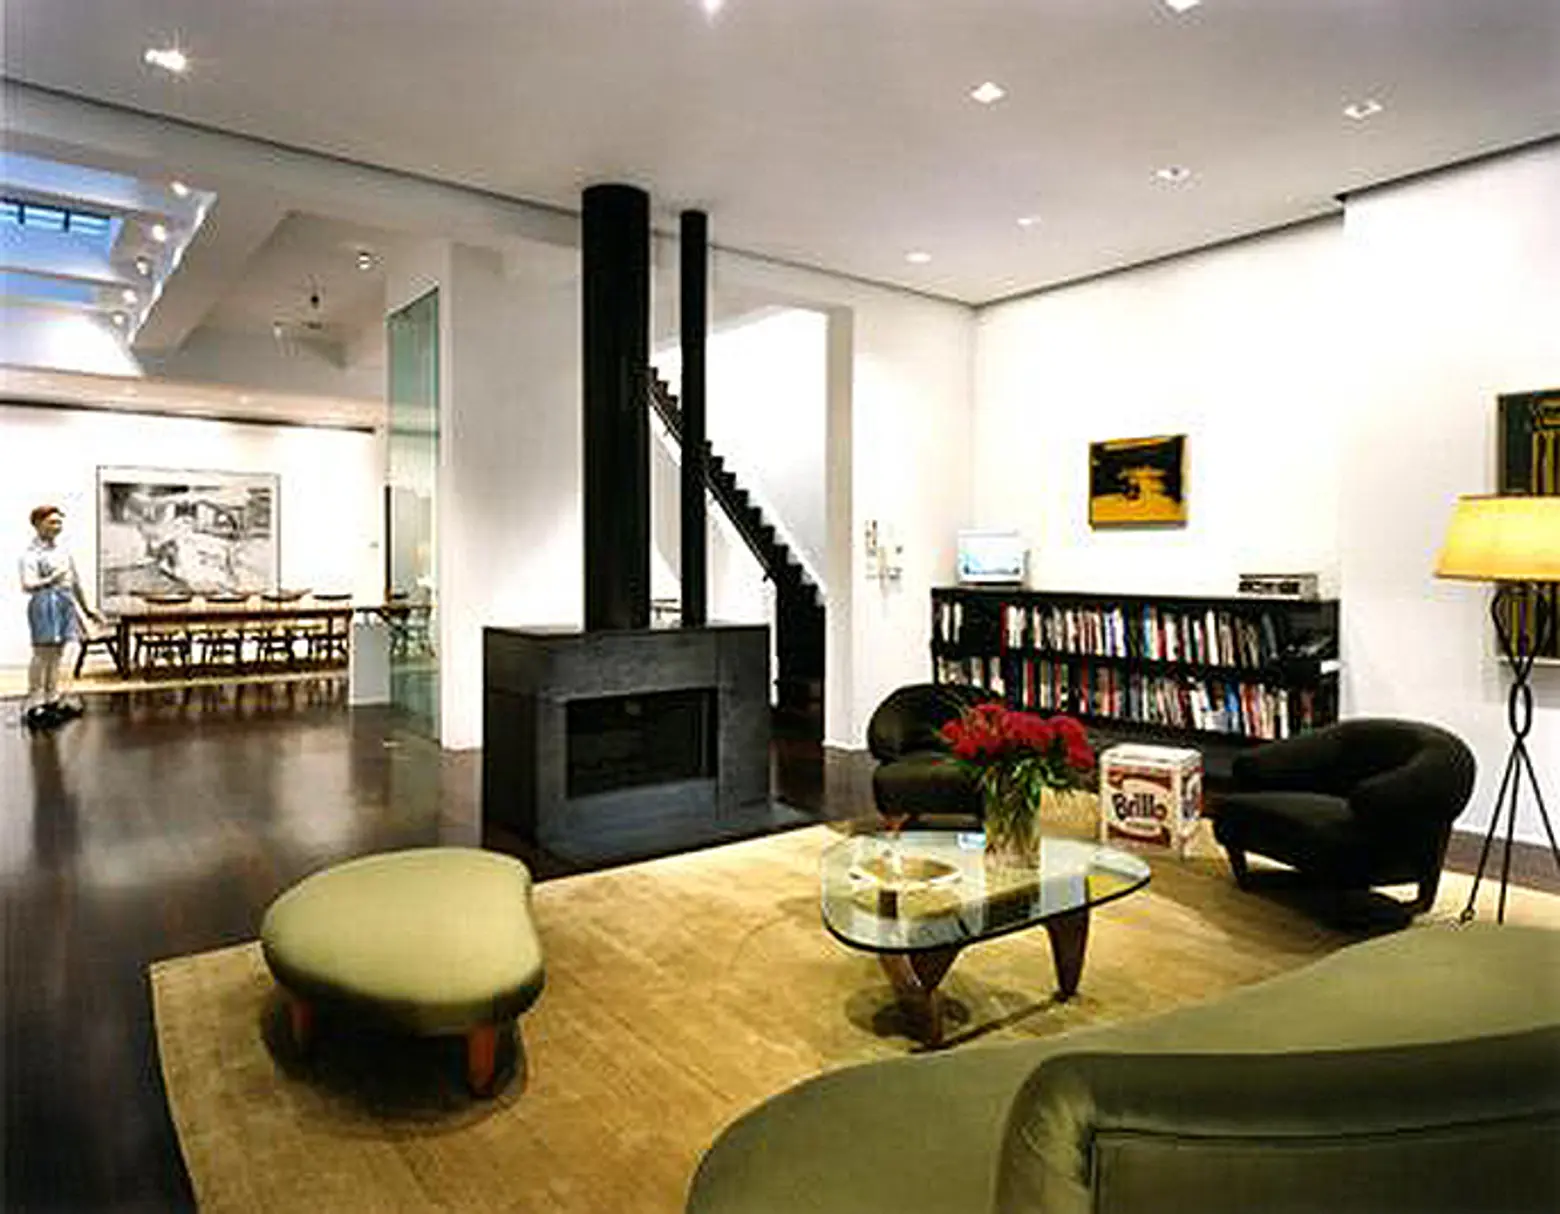 Larry Gagosian , Larry Gagosian , harkness mansion, 147 East 69th Street, 4 East 74th Street, new york carriage house, architect Francois de Menil